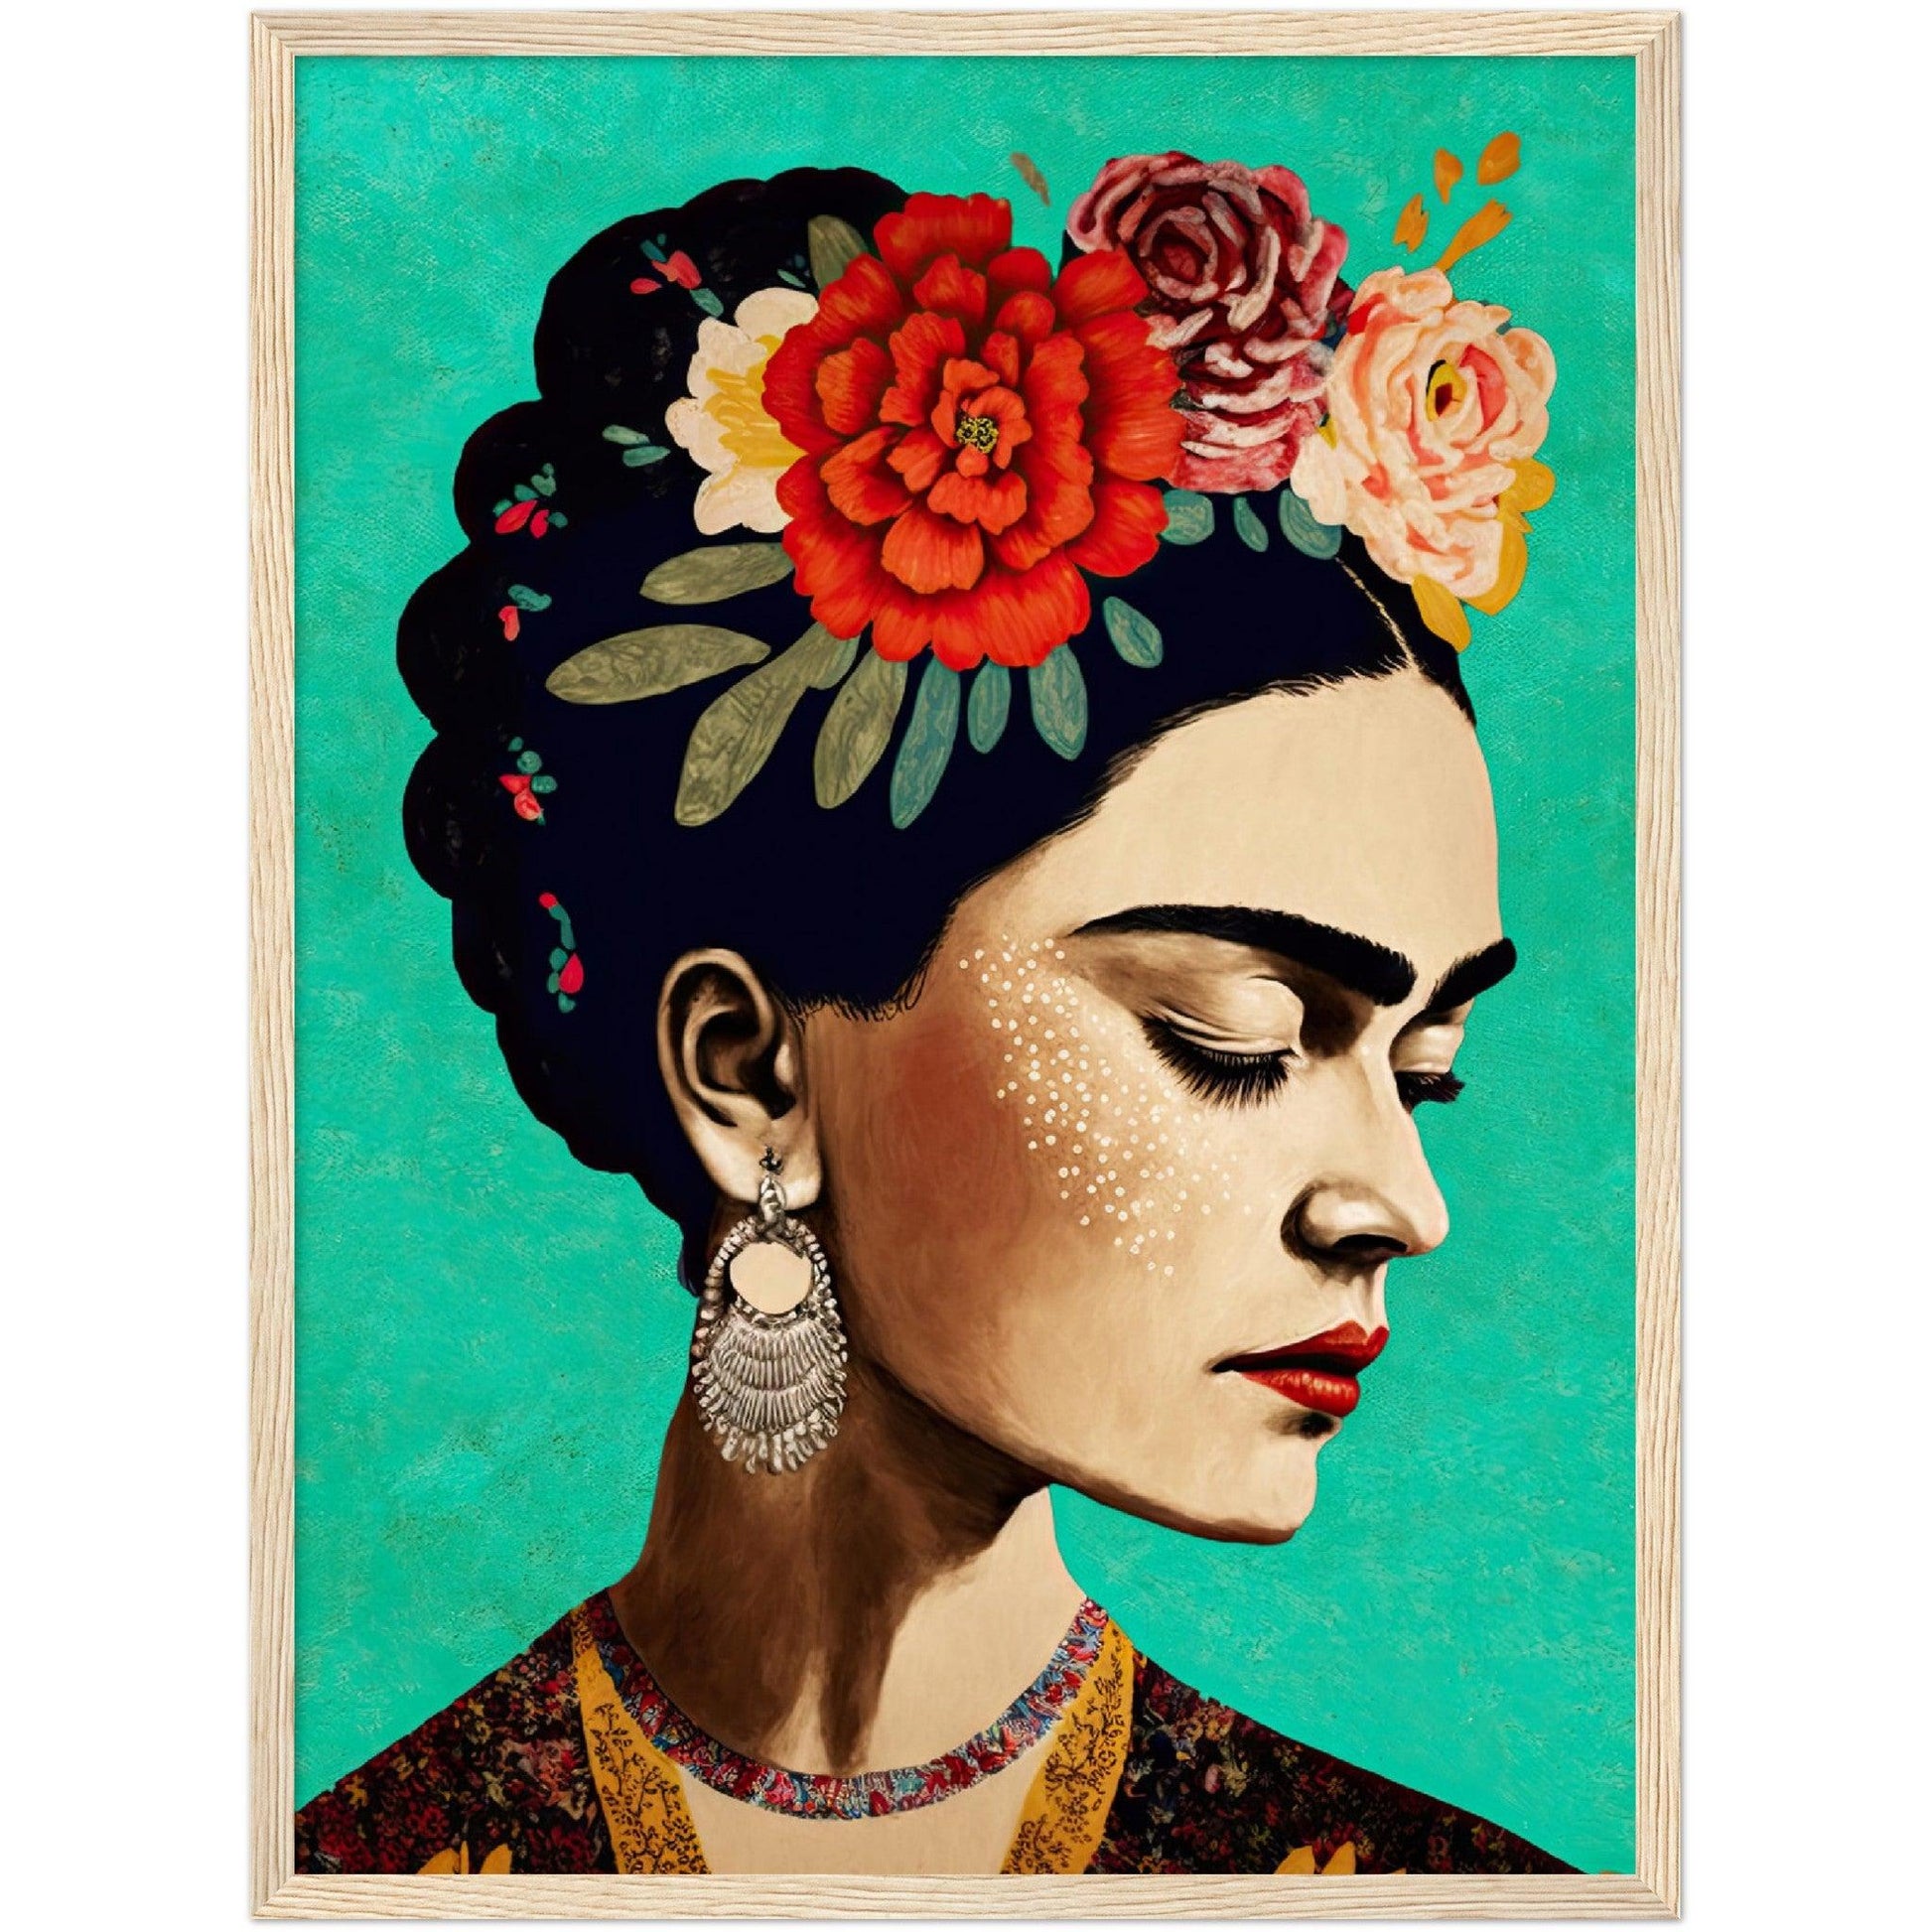 Serenity - Frida inspired collection - Masters in Art